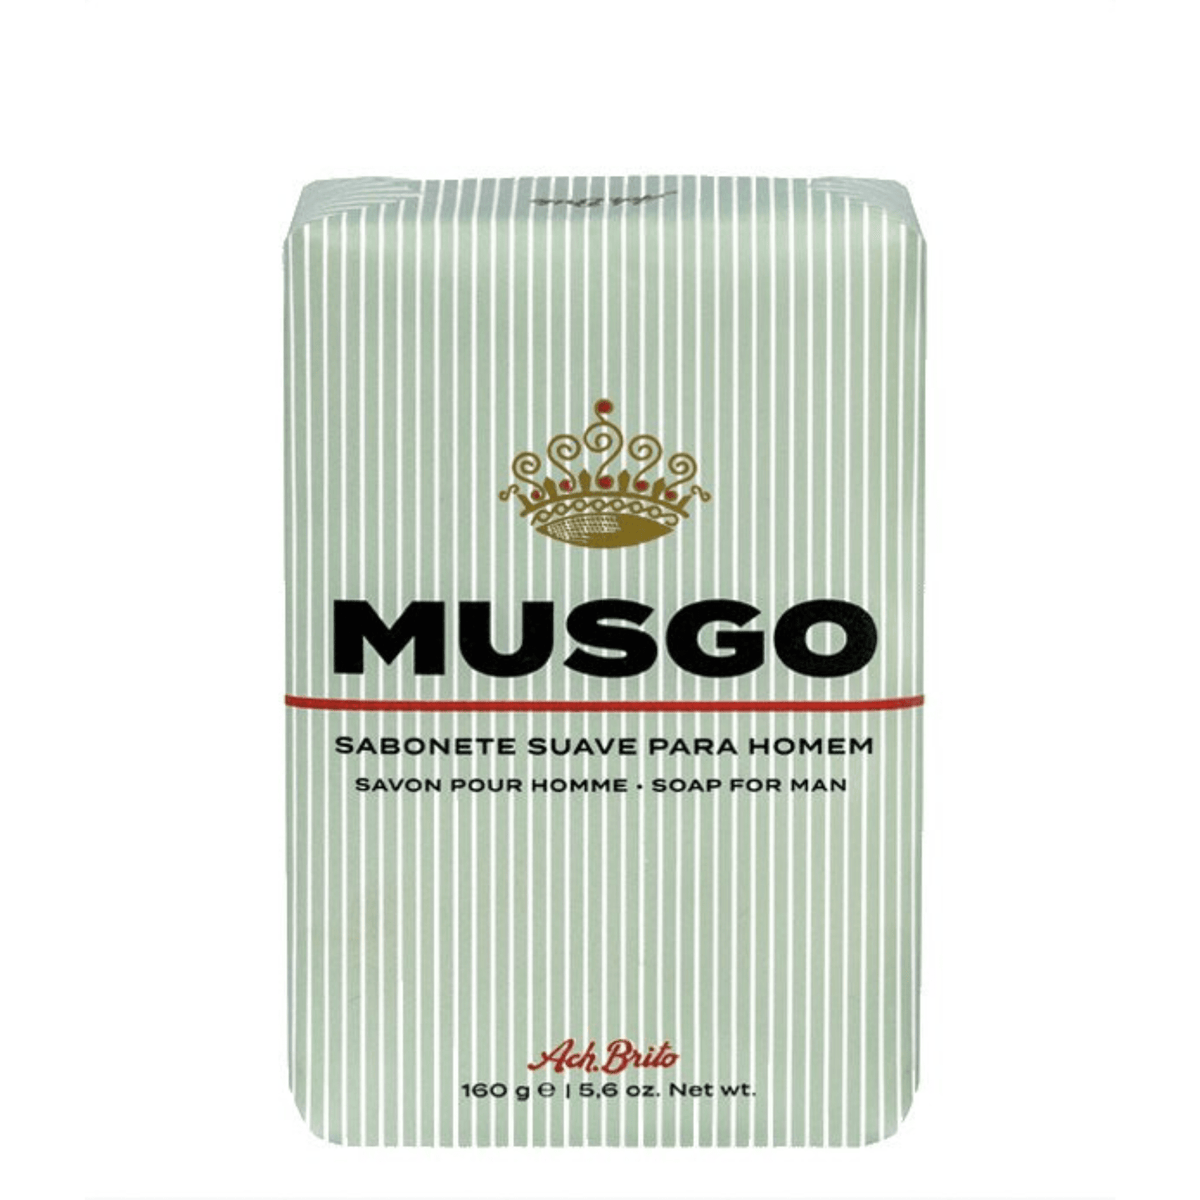 Primary Image of MUSGO Bar Soap